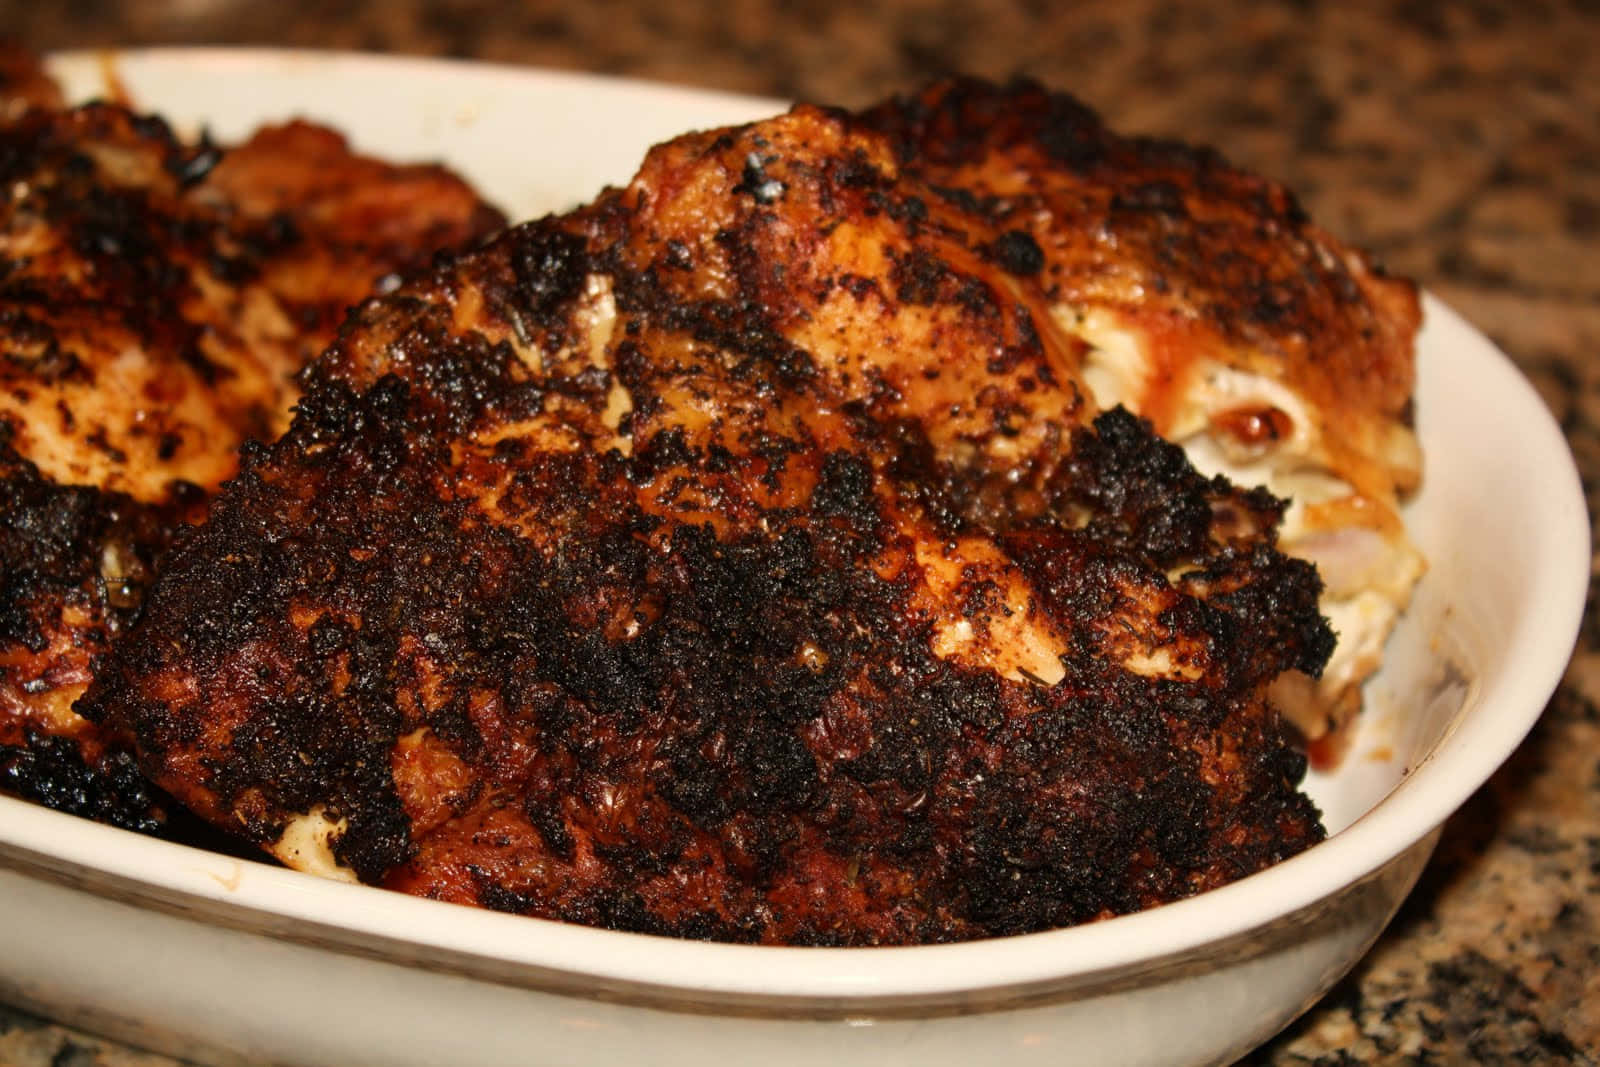 Enjoy a delectable meal of Blackened Chicken Wallpaper